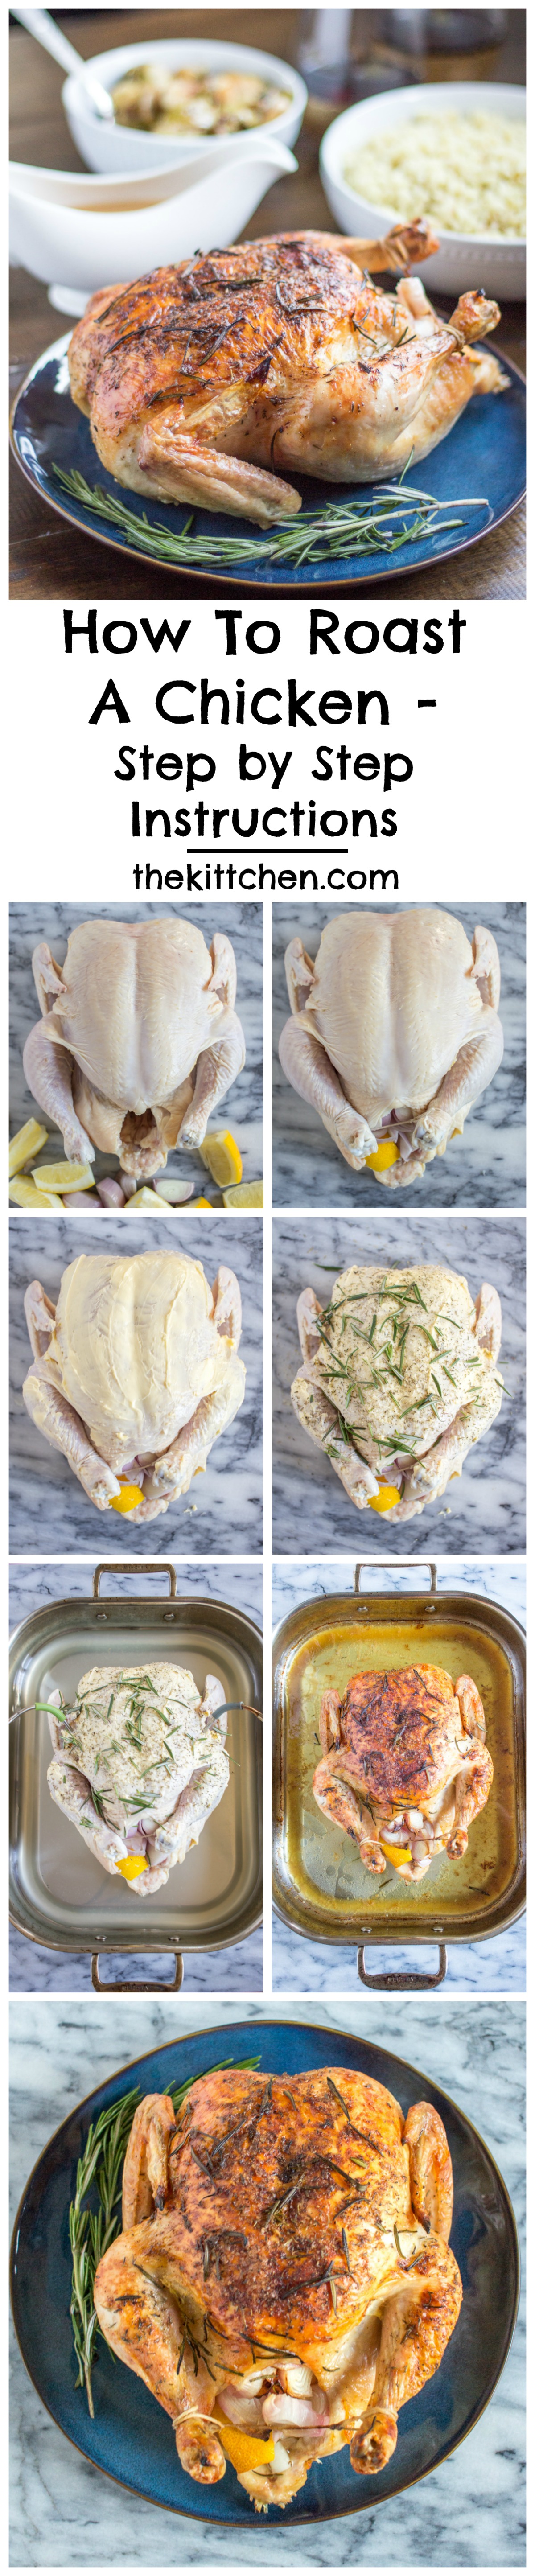 How to Roast a Chicken - complete instructions